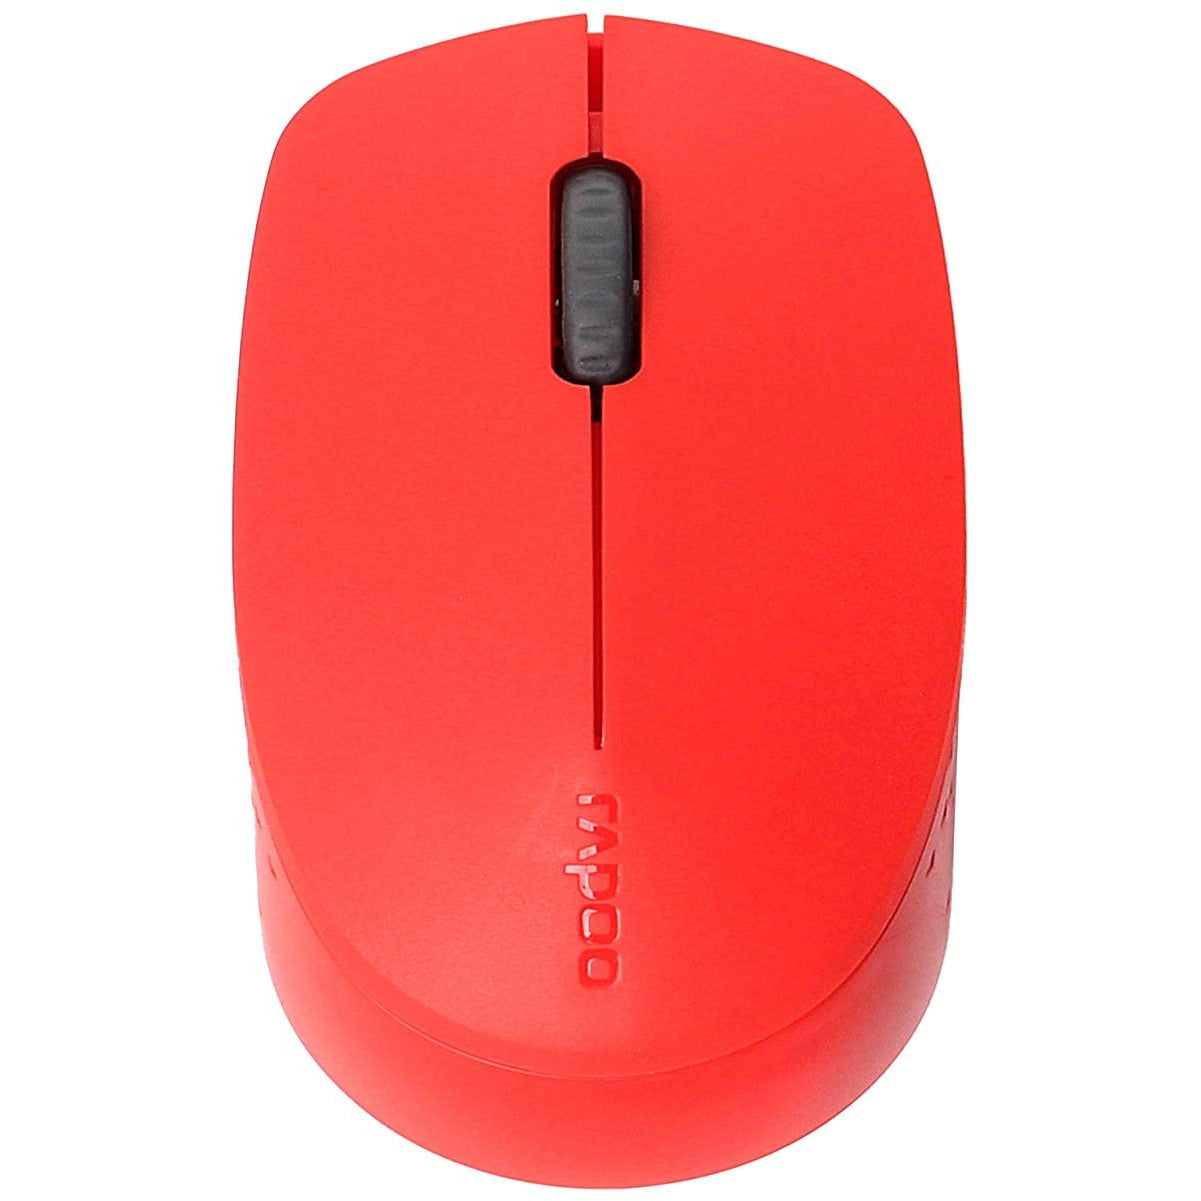 Rapoo M100 Multi-mode Wireless Silent Optical Mouse - Red - Refurbished Excellent